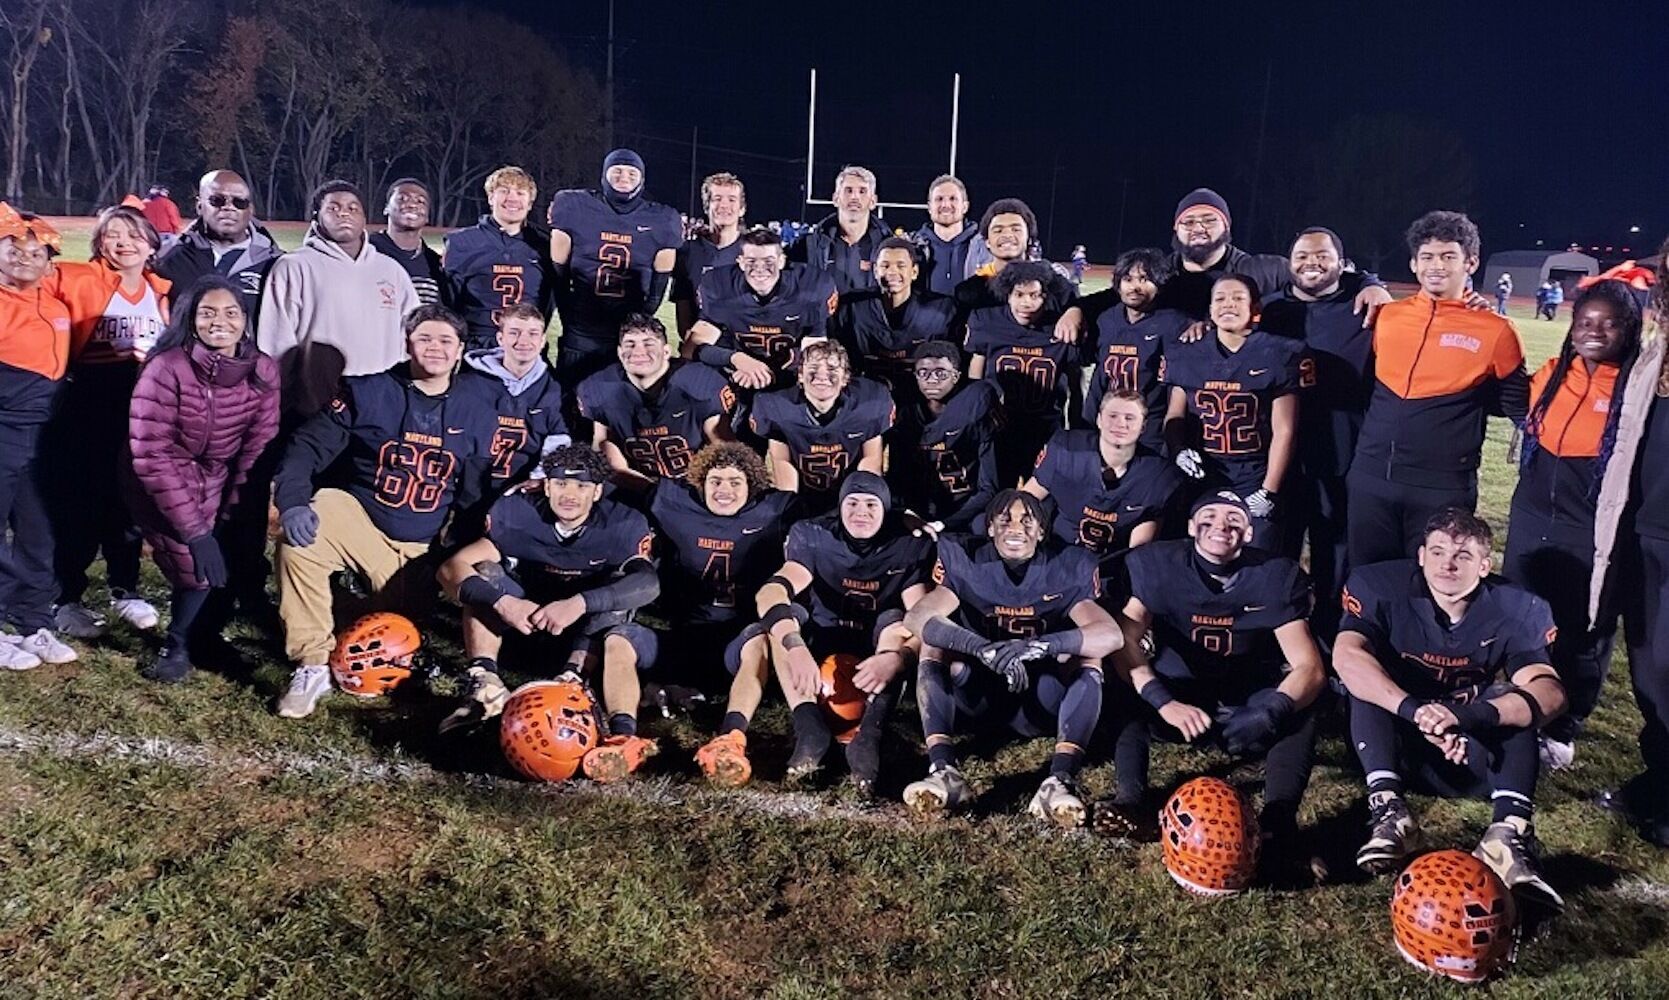 Junc leads MSD to second straight Keystone State Football League title with win over Model